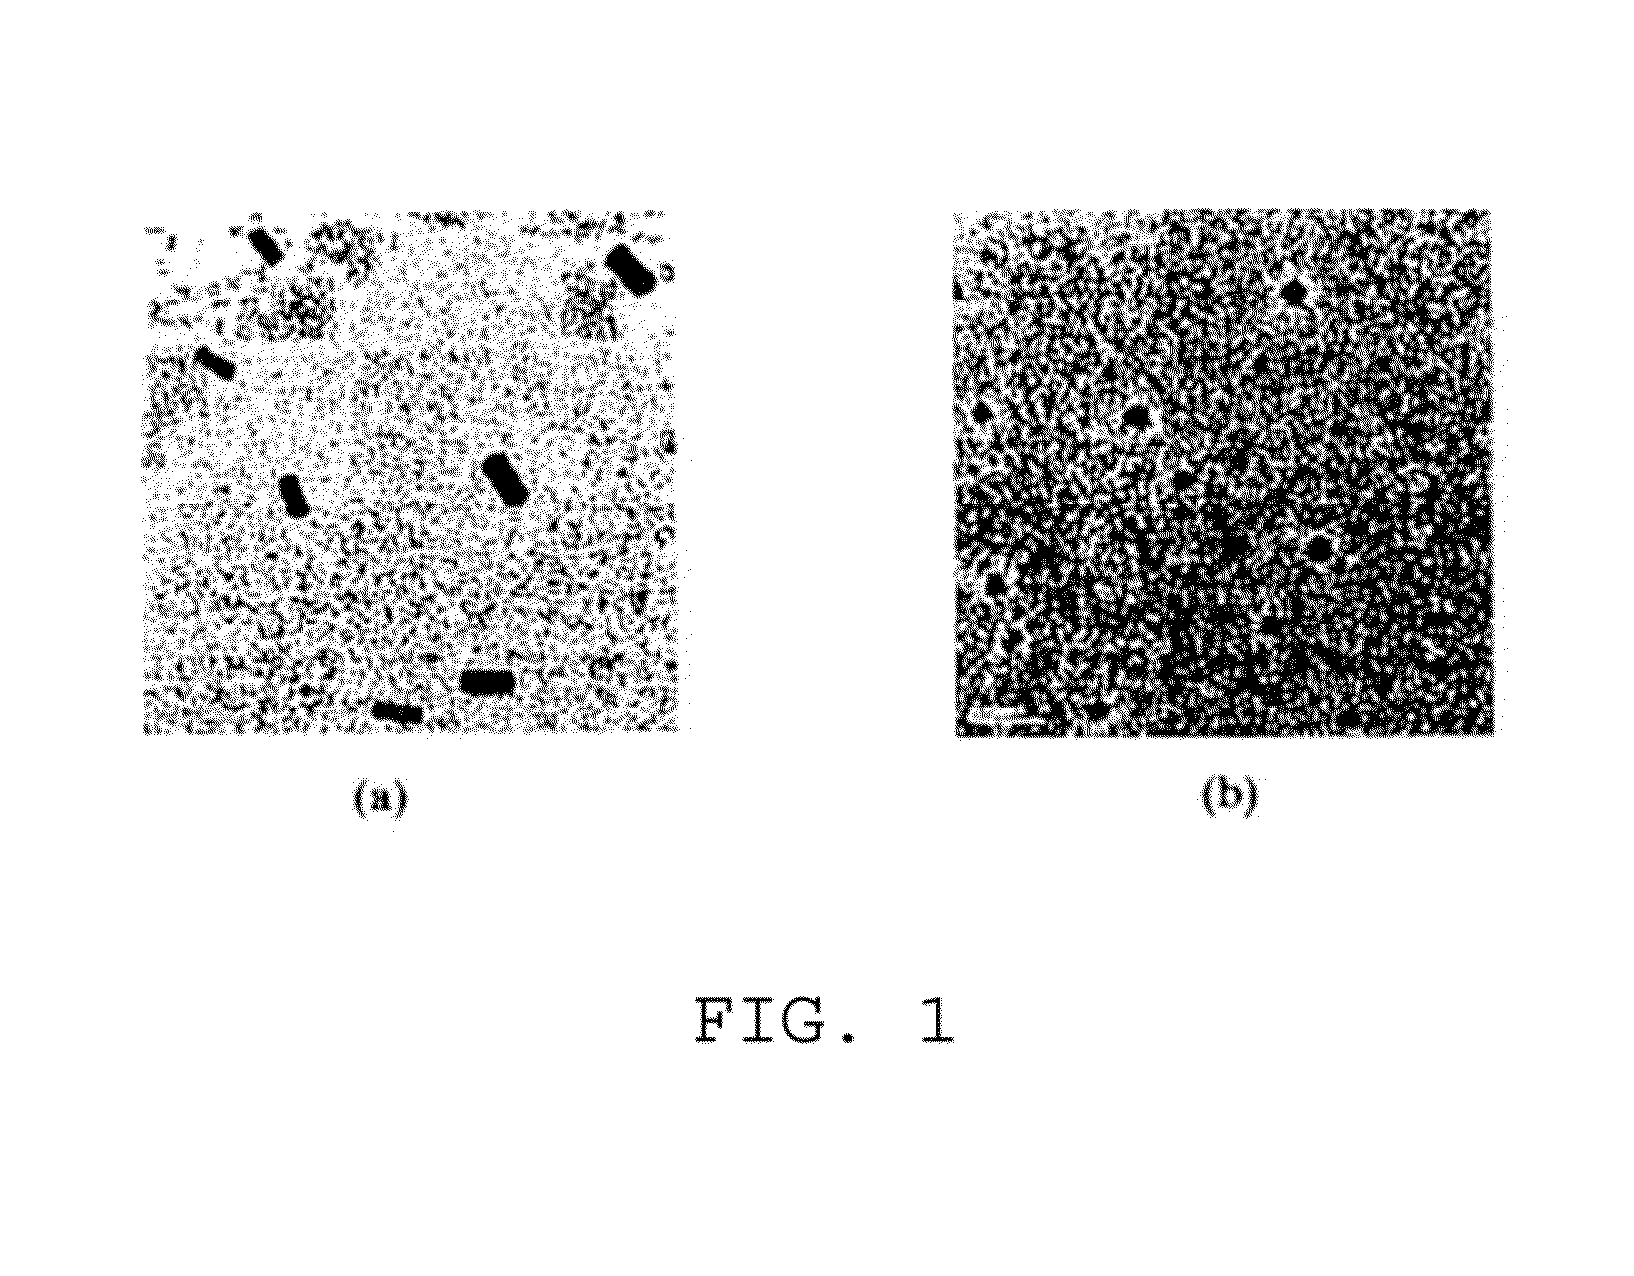 Aqueous method for making magnetic iron oxide nanoparticles